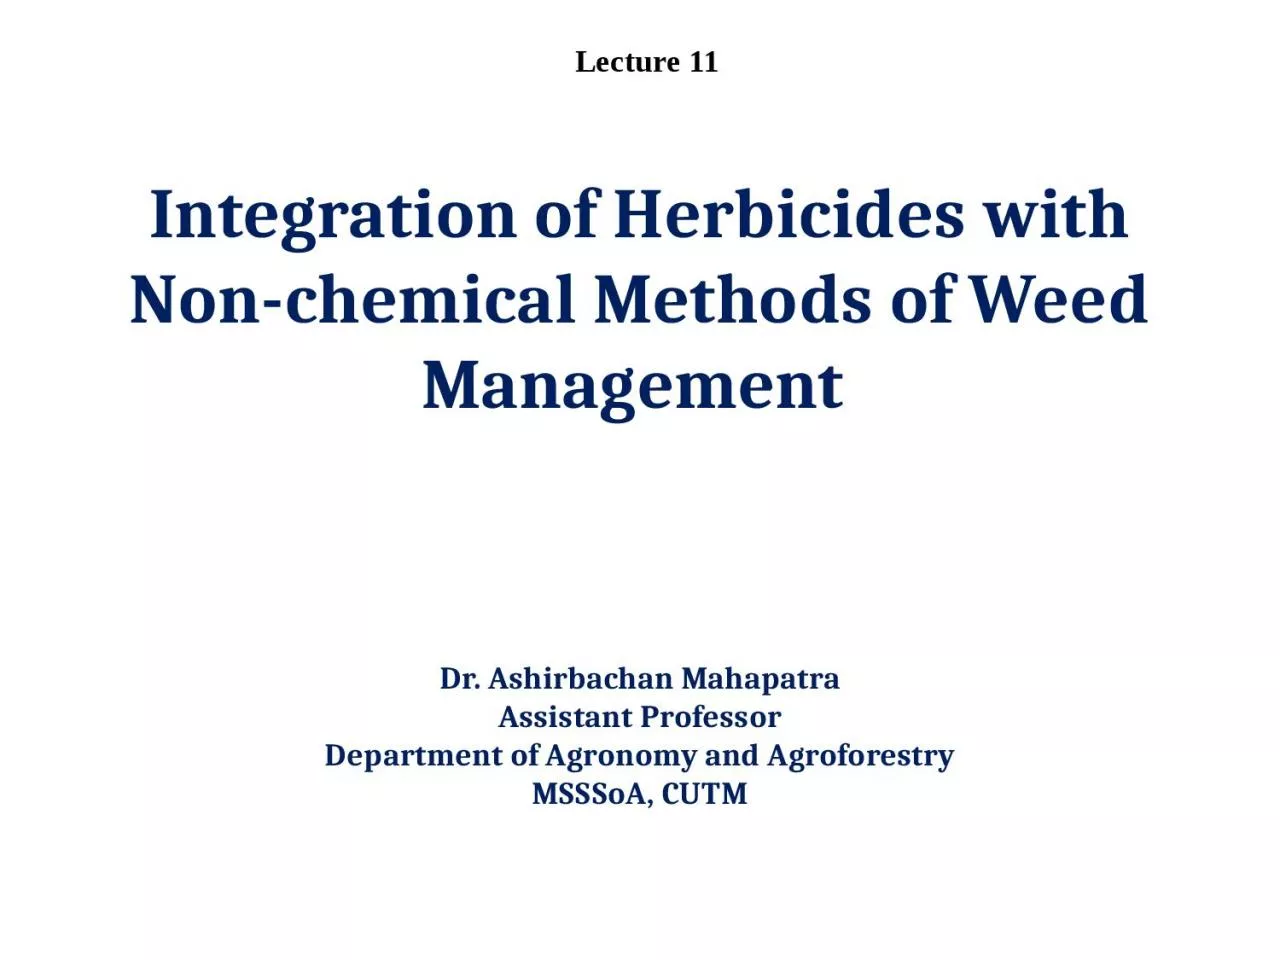 Integration  of Herbicides with Non-chemical Methods of Weed Management